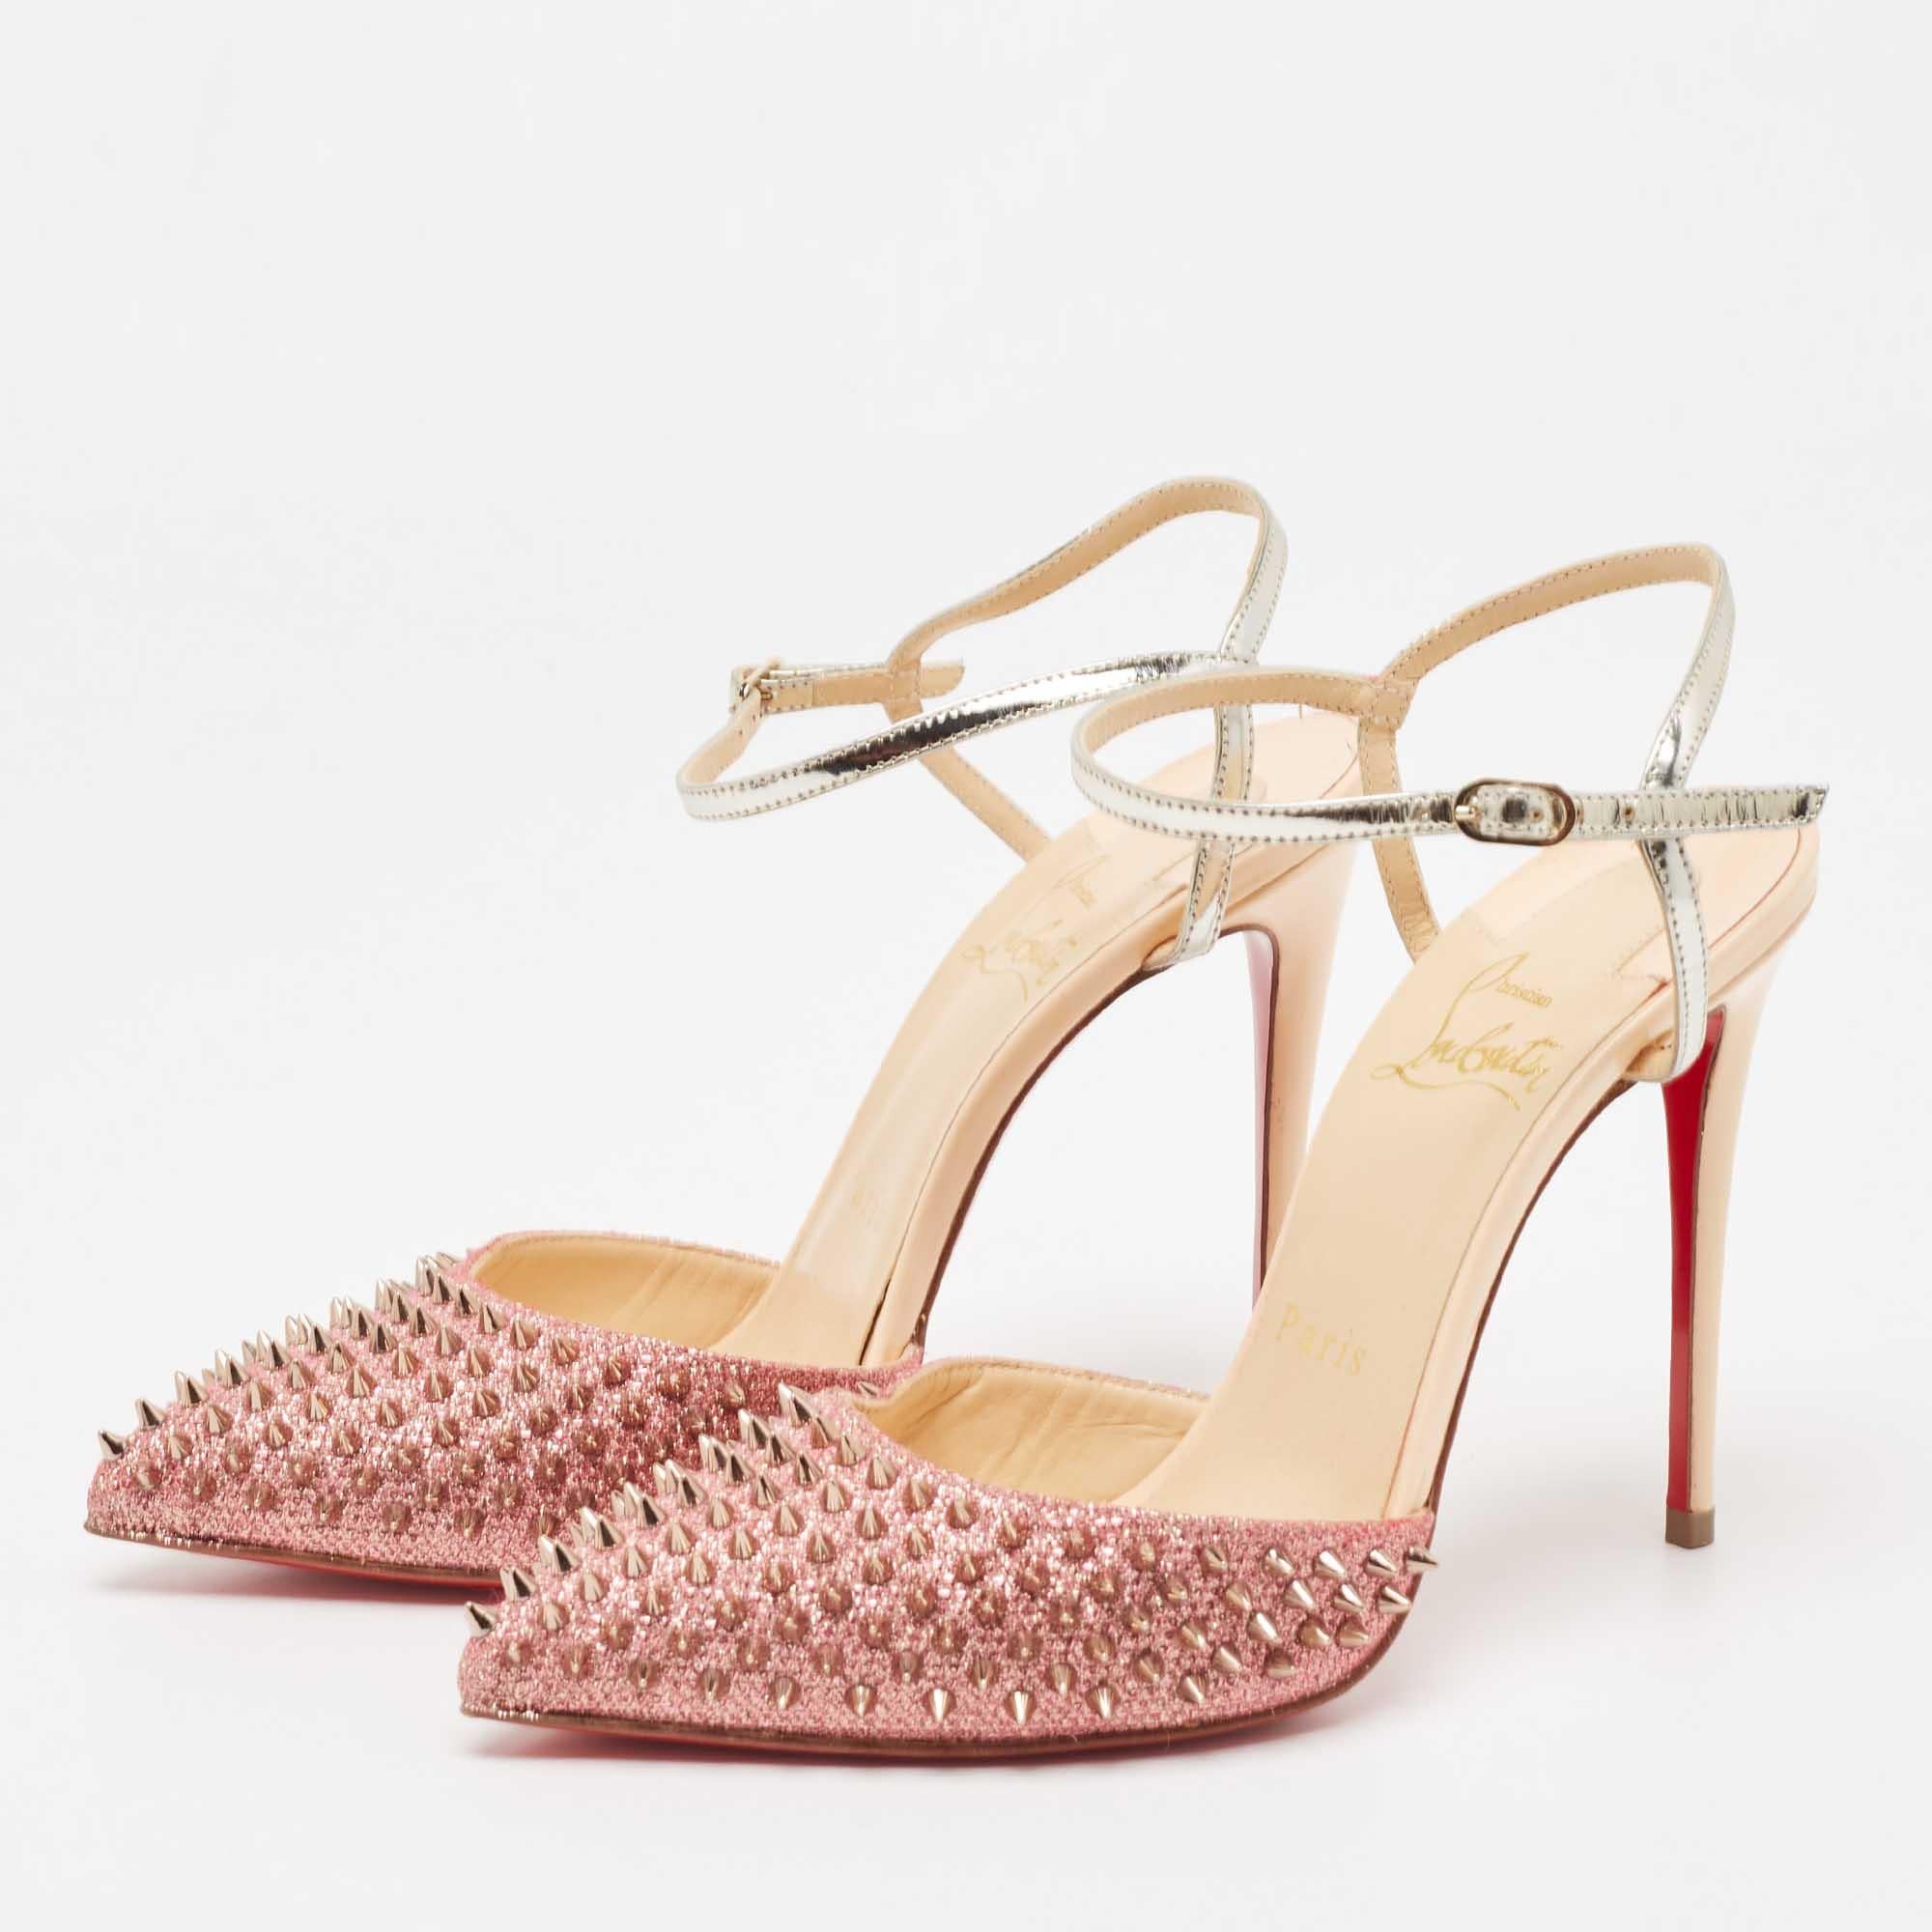 These pumps from Christian Louboutin are meant to be a loved choice. Wonderfully crafted and balanced on sleek heels, the pumps will lift your feet in a stunning silhouette.

